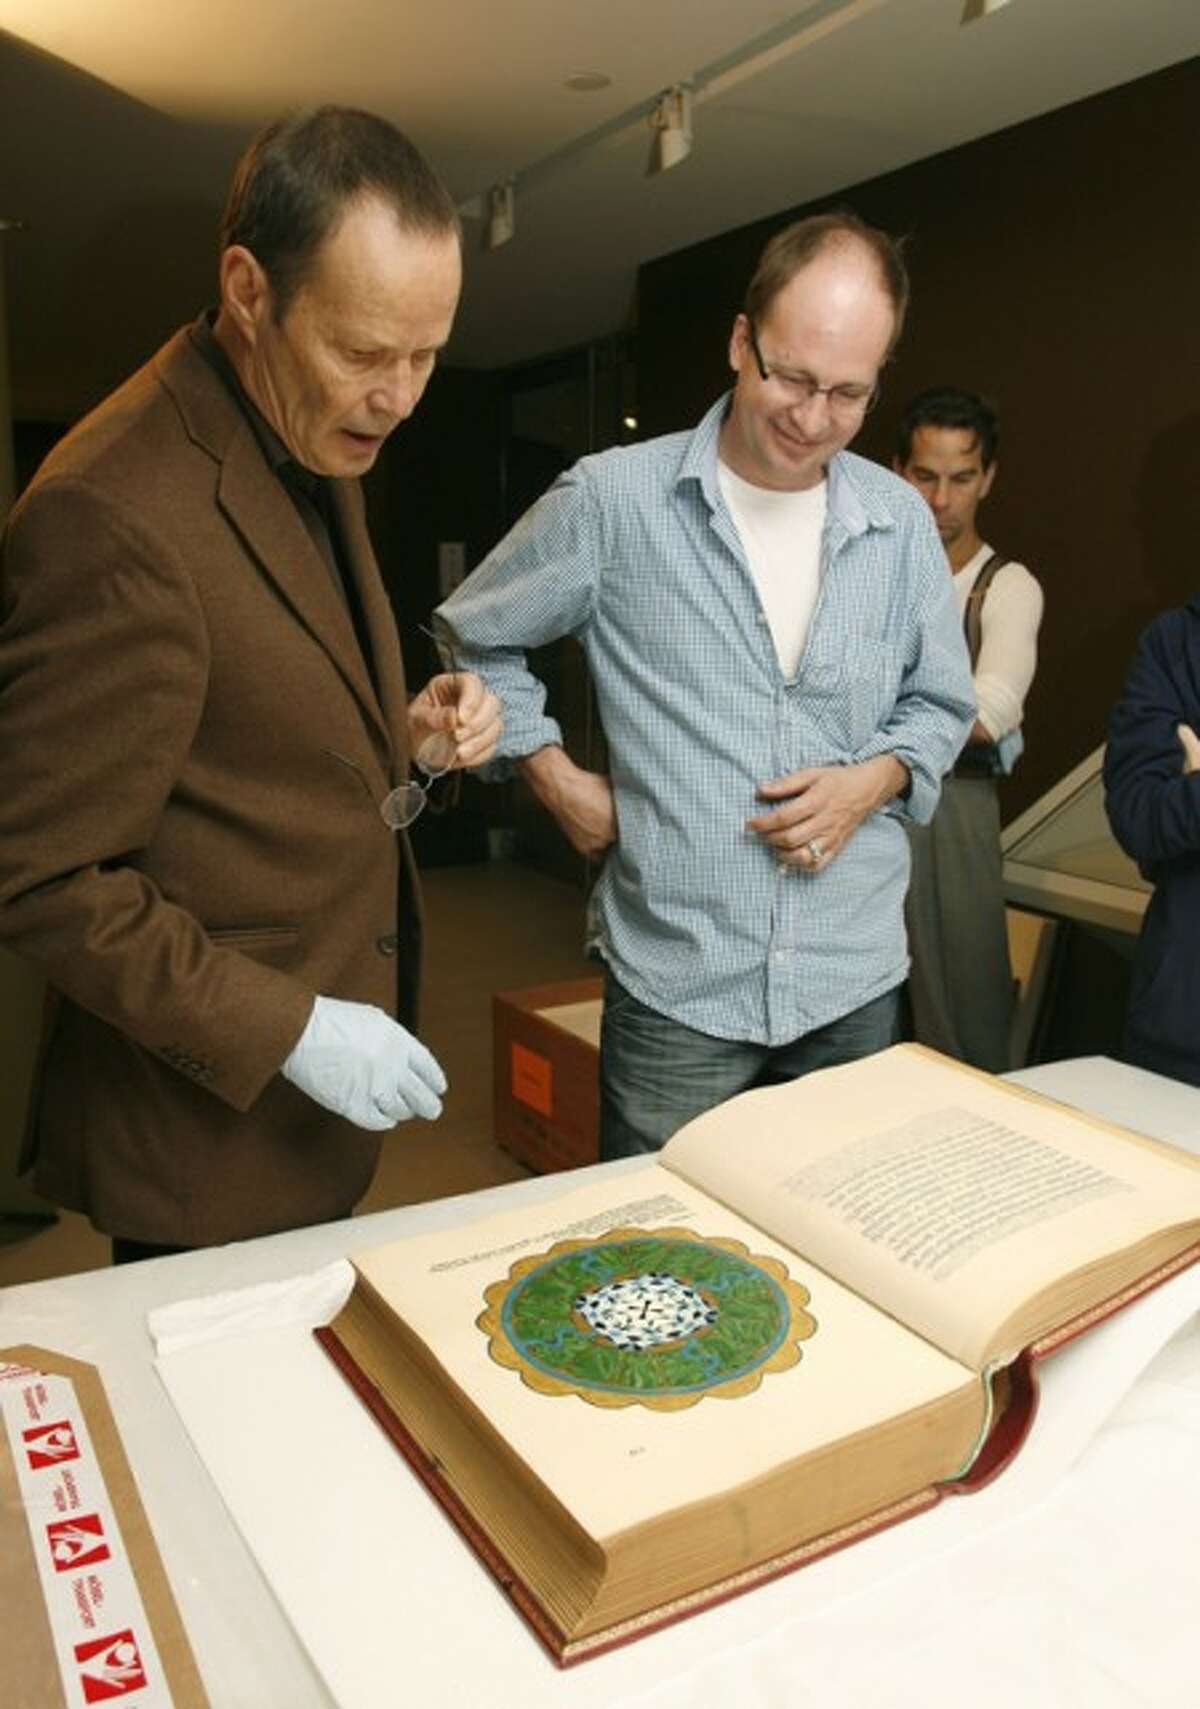 In this photo provided by the Rubin Museum of Art, the museum''s chief curator, Martin Brauen, left, and Felix Walder, great-grandson to Carl Jung, inspect Carl Jung''s "The Red Book" after it''s arrival at the Rubin Museum of Art in New York Tuesday, Sept. 29, 2009. "The Red Book," considered one of the most important unpublished works in the field of psychology, will be displayed to the public for the first time on October 7, coinciding with the first-ever publication of the book by W.W. Norton & Company. (AP Photo/Rubin Museum of Art, Stuart Ramson)